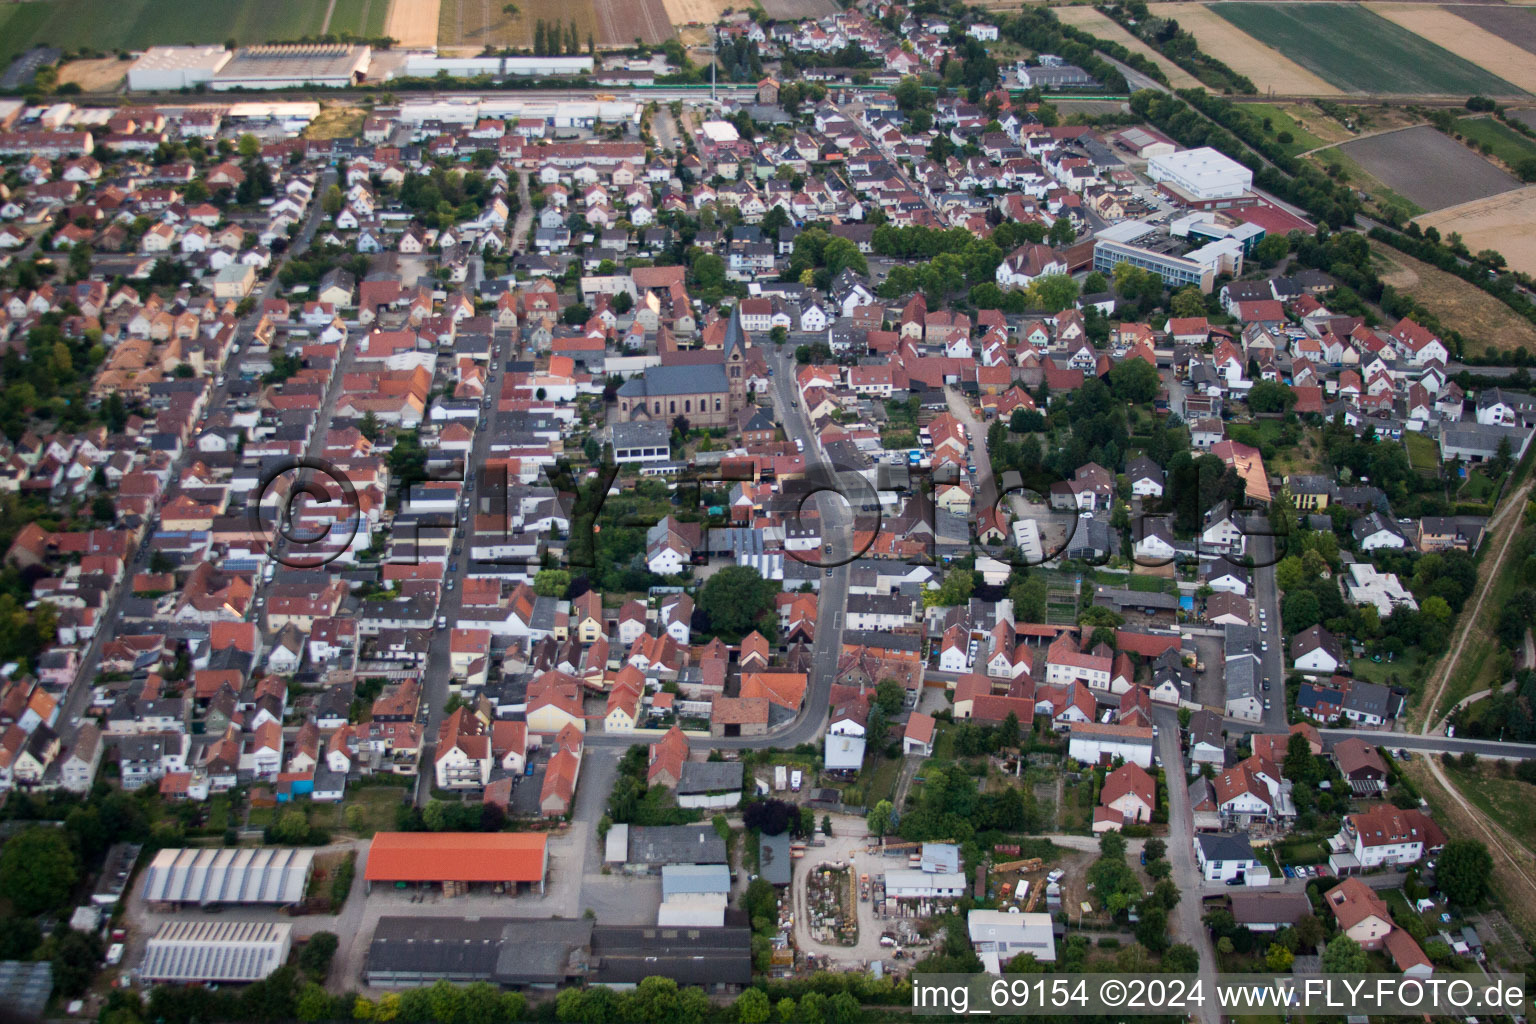 City view of the city area of in the district Roxheim in Bobenheim-Roxheim in the state Rhineland-Palatinate from above